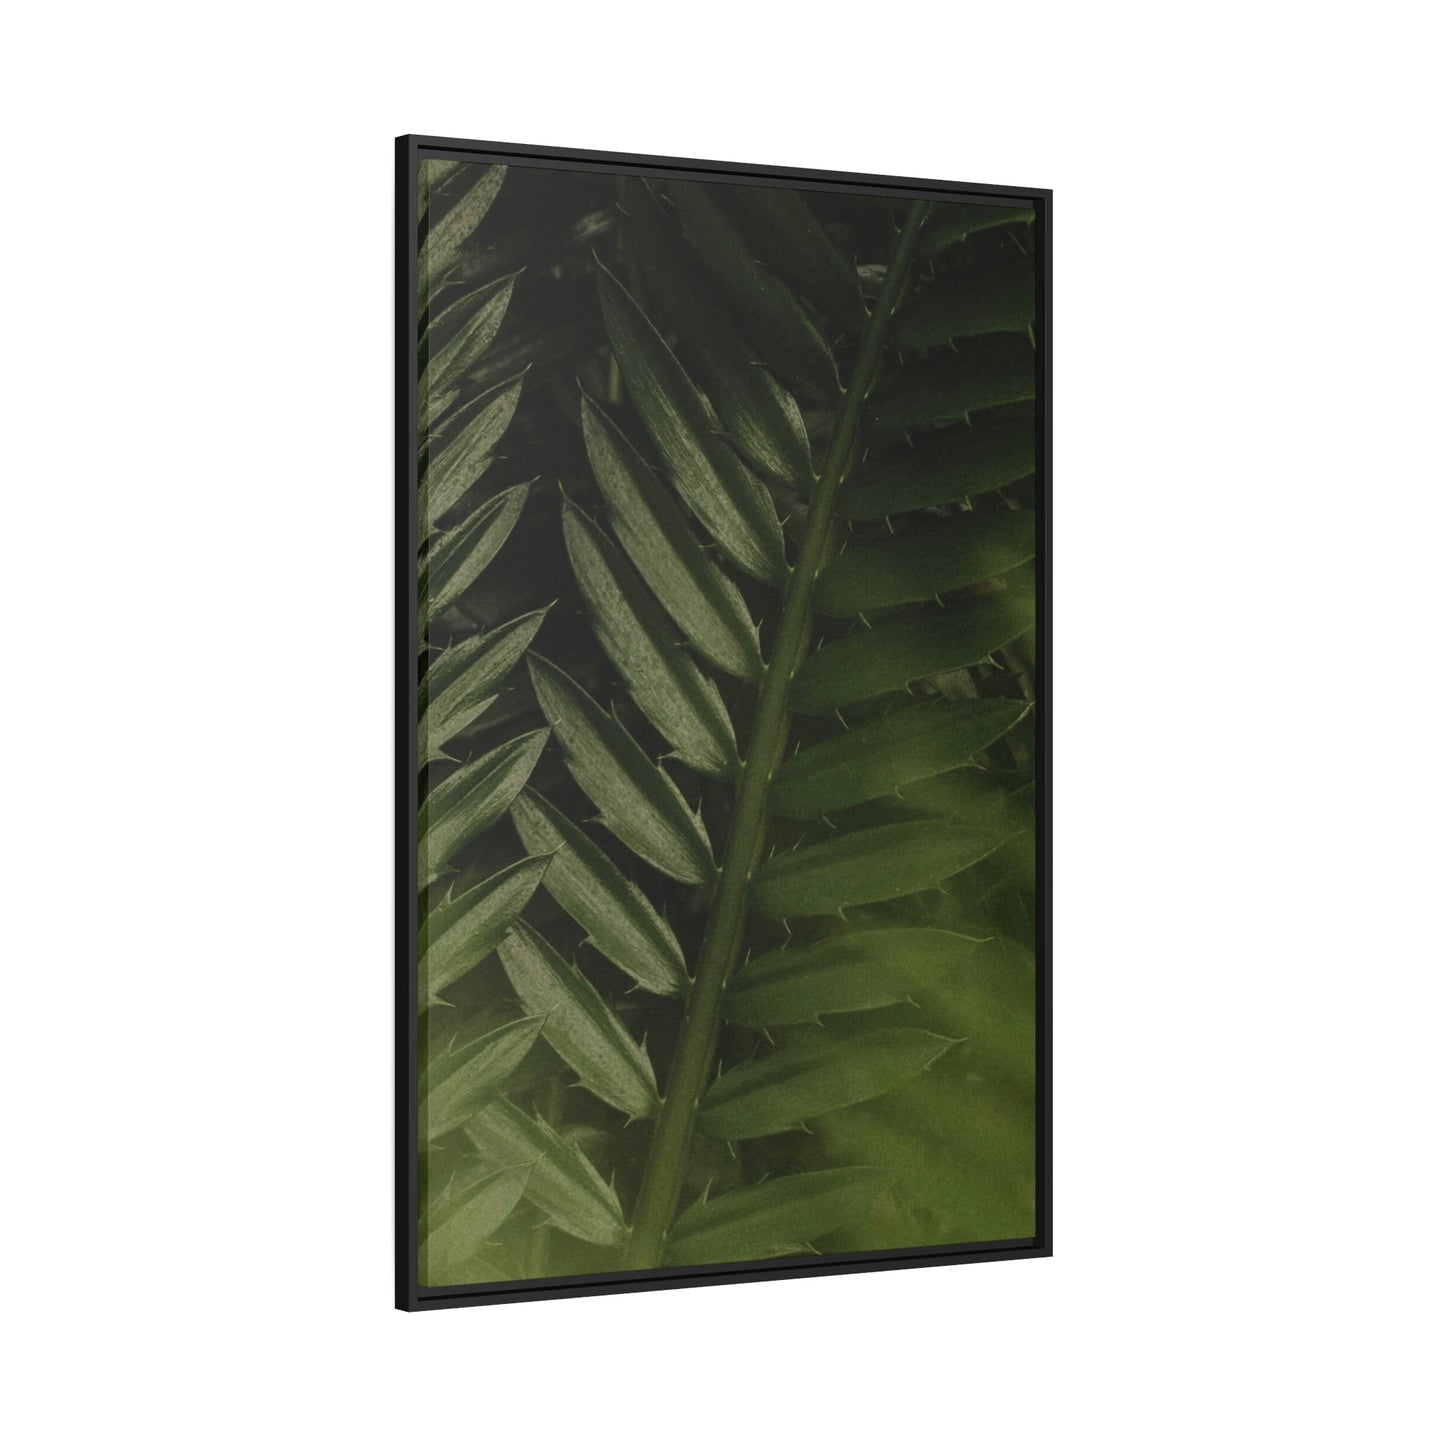 The Splendor of Ferns: A Beautiful Painting on Canvas